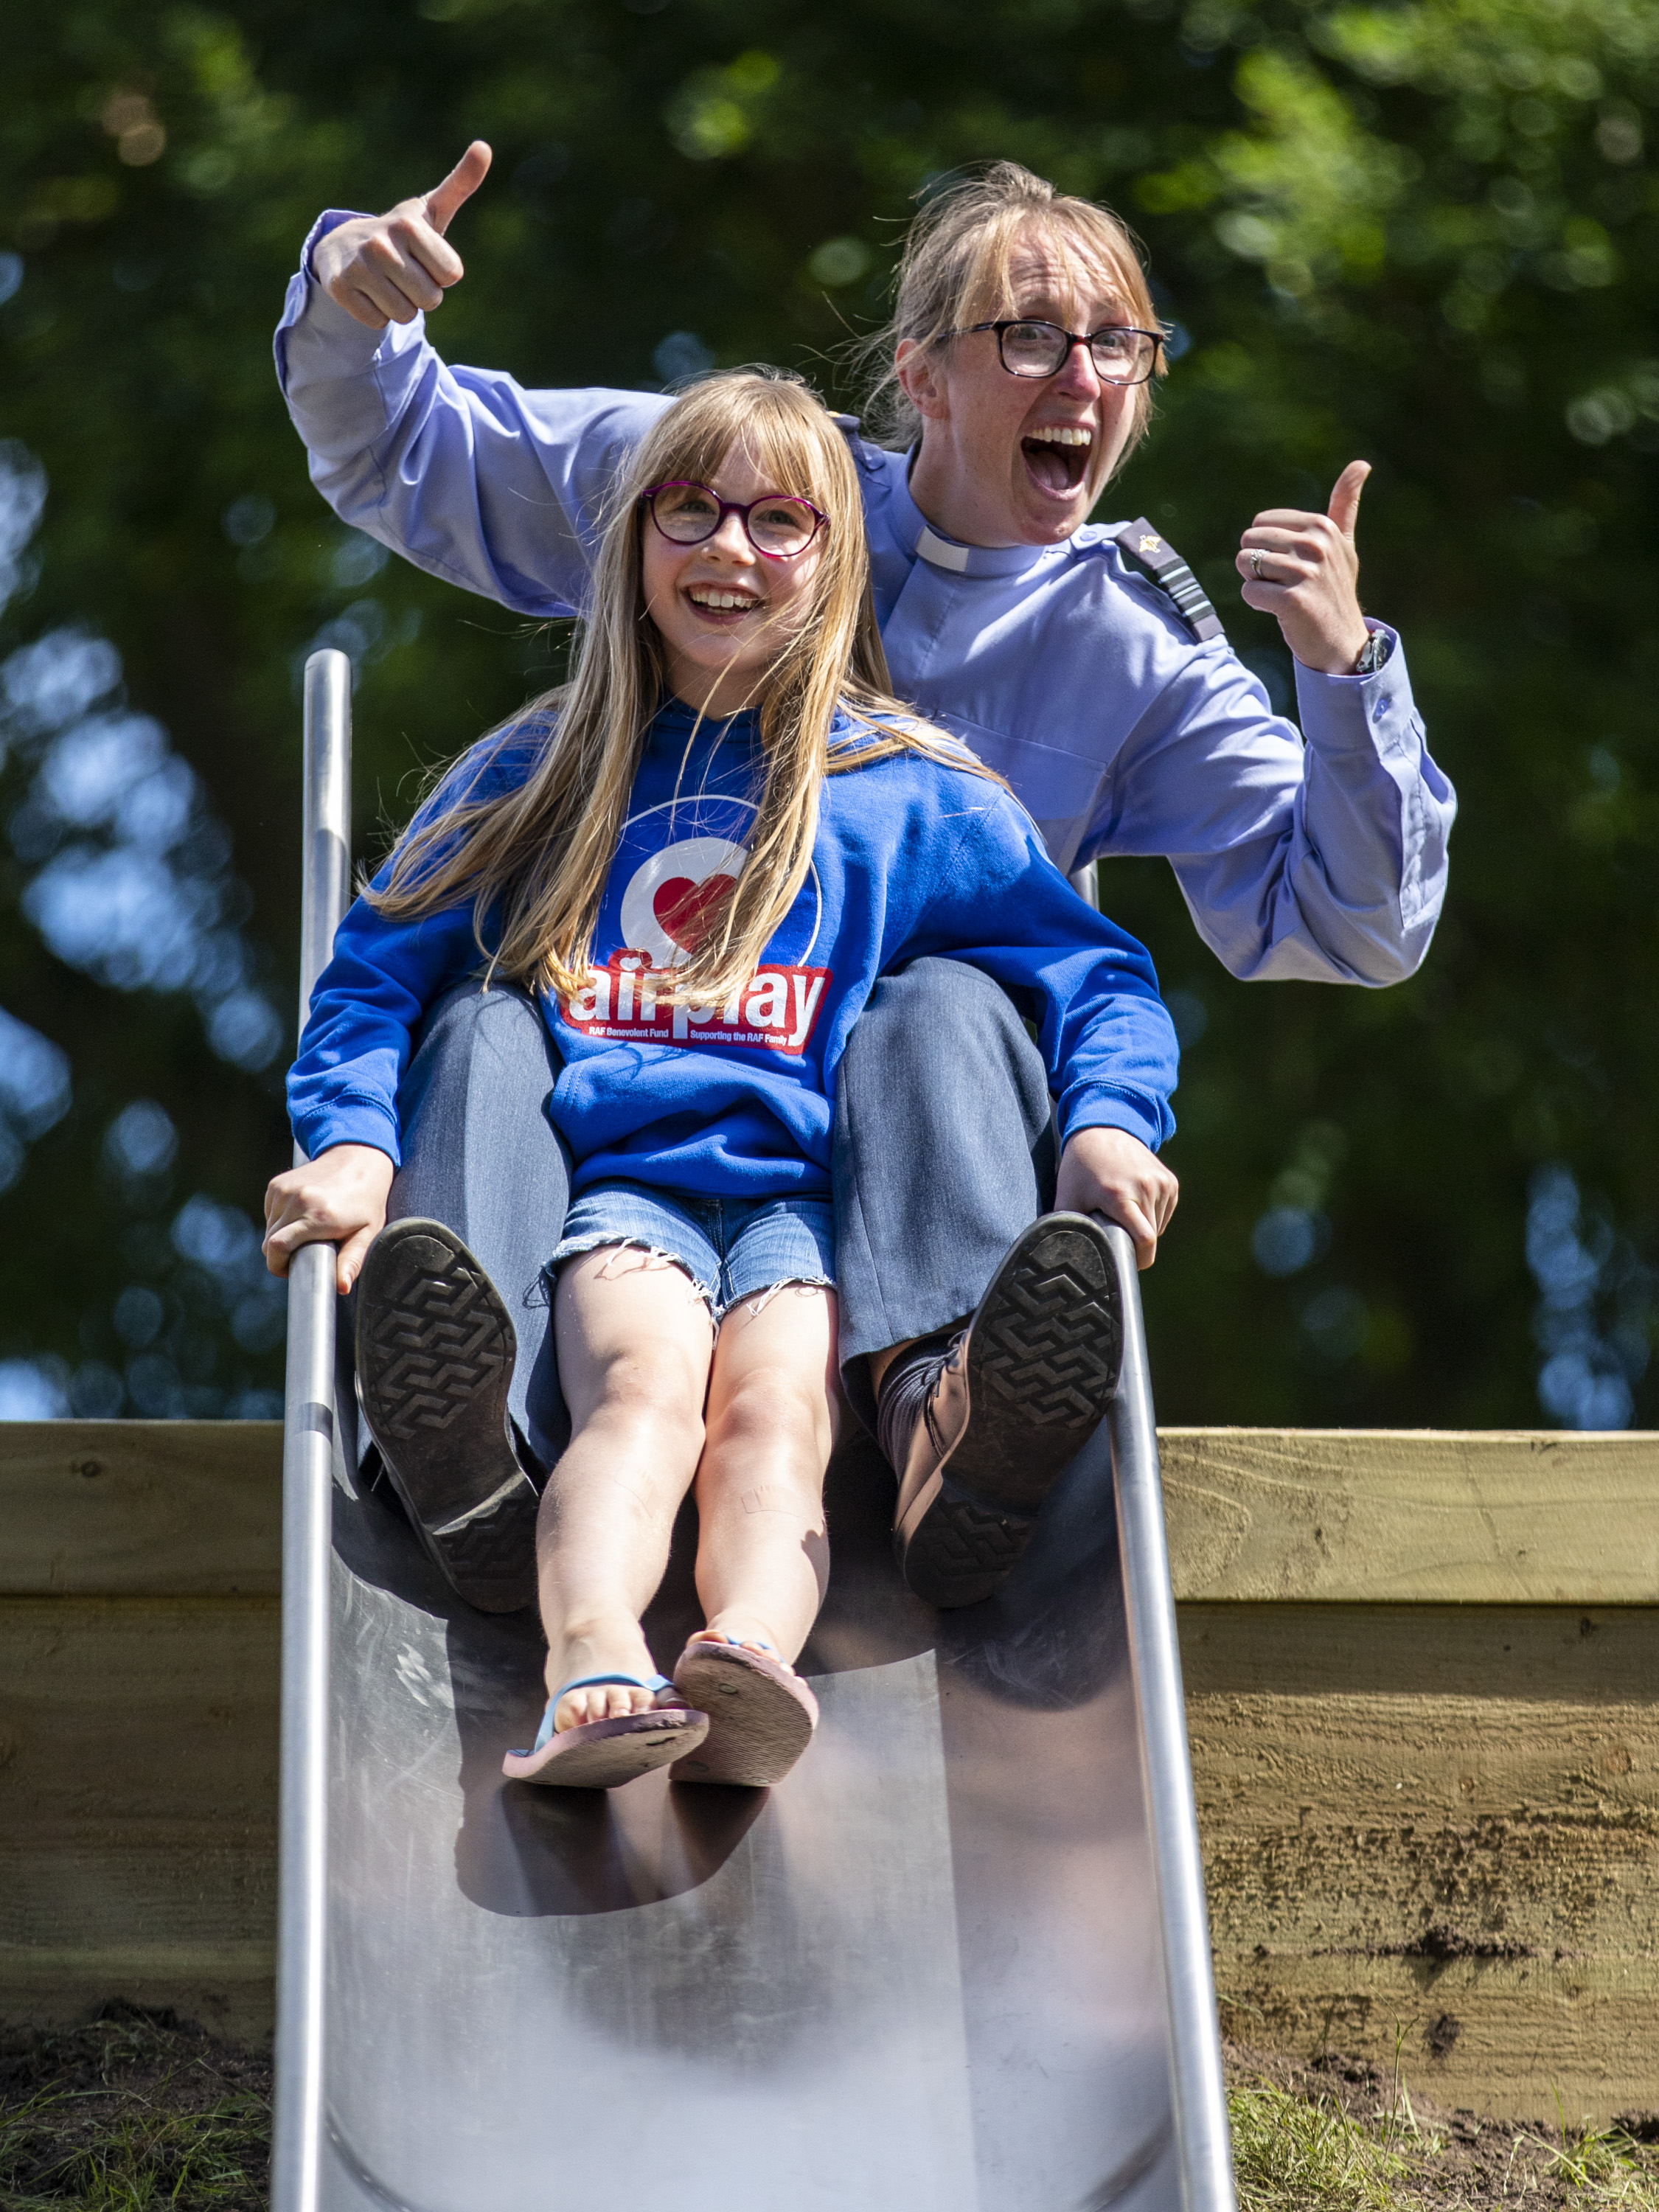 Image shows RAF Personnel with child going down an outdoors play park slide.